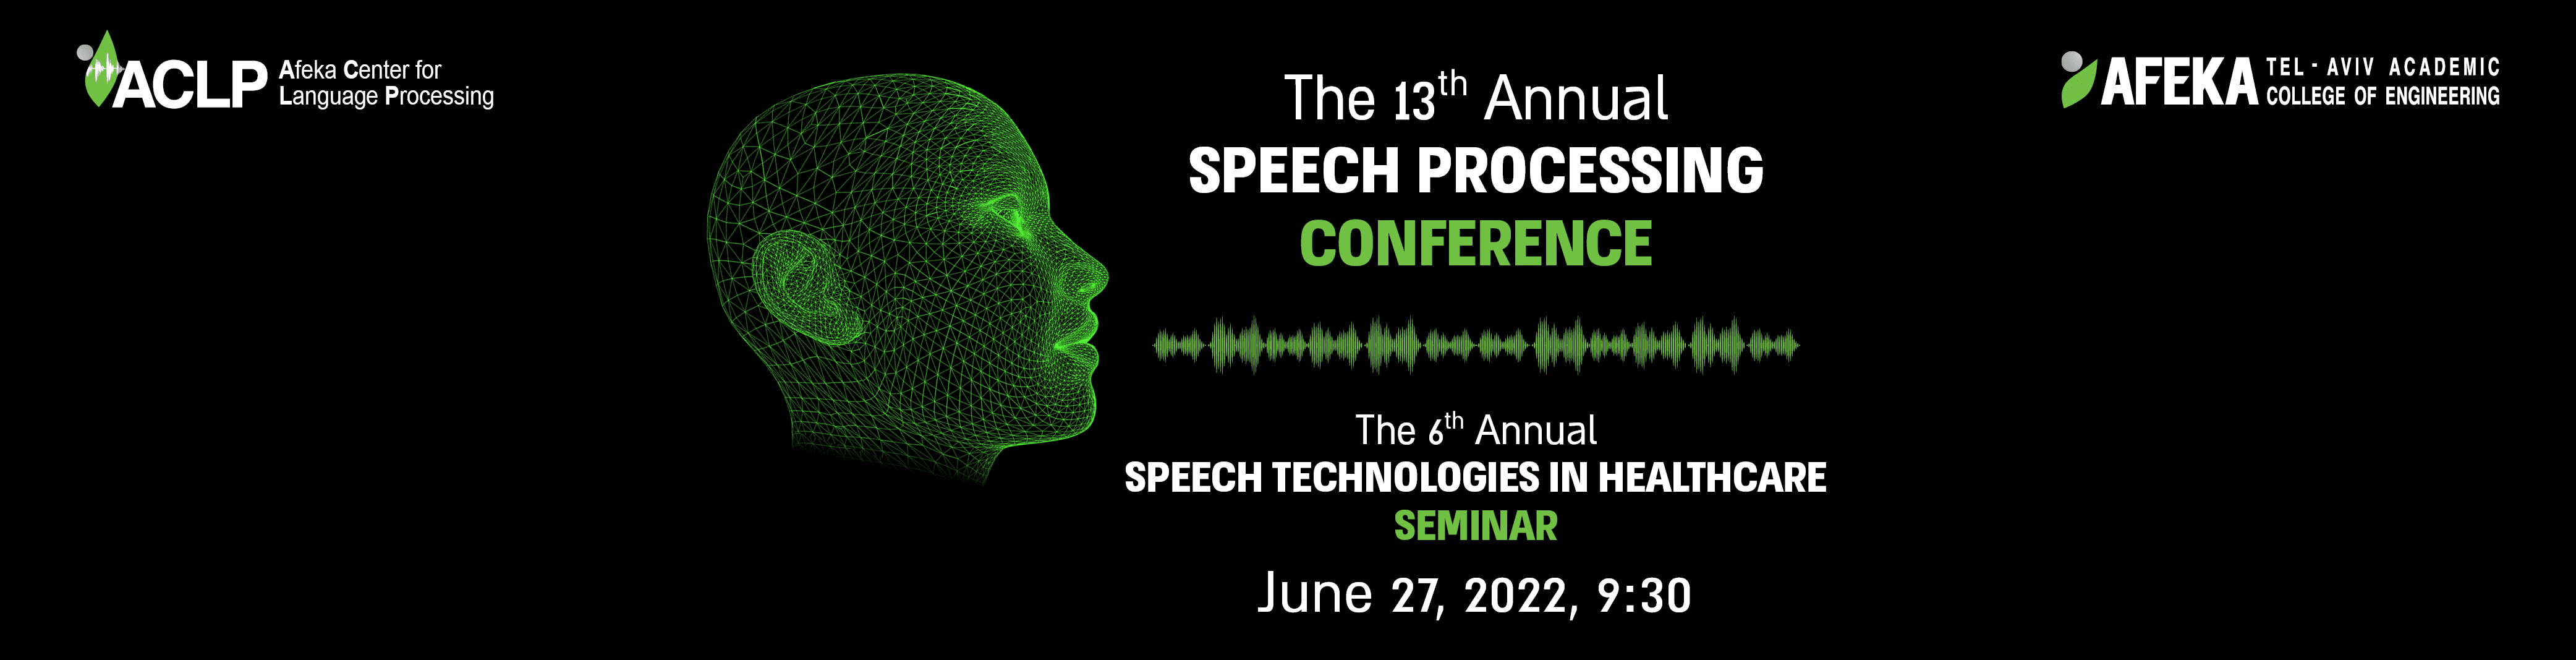 afeka speech processing conference